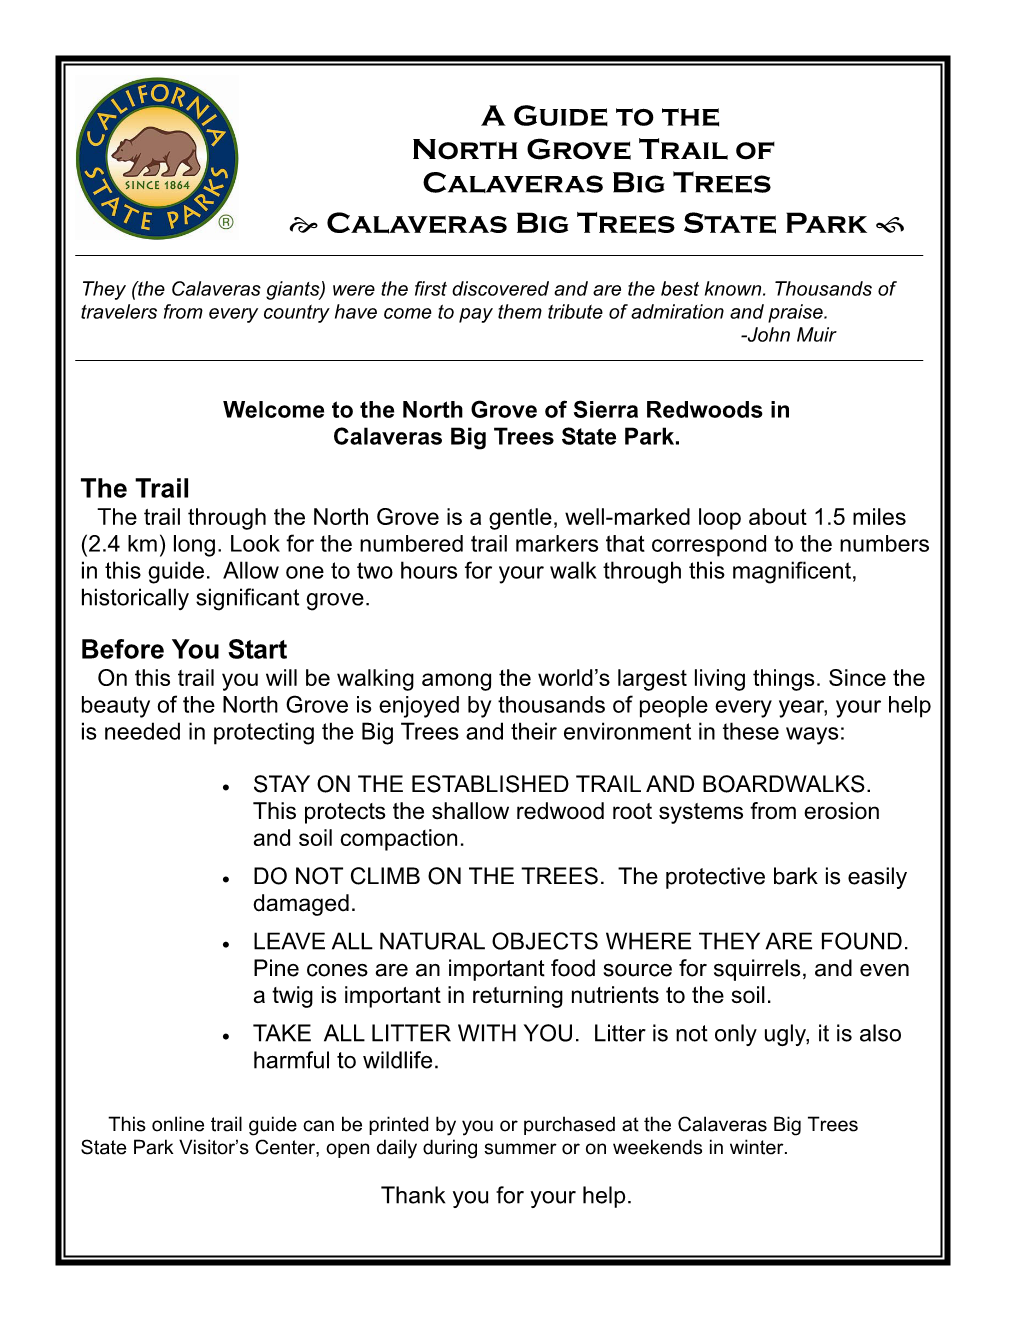 A Guide to the North Grove Trail of Calaveras Big Trees